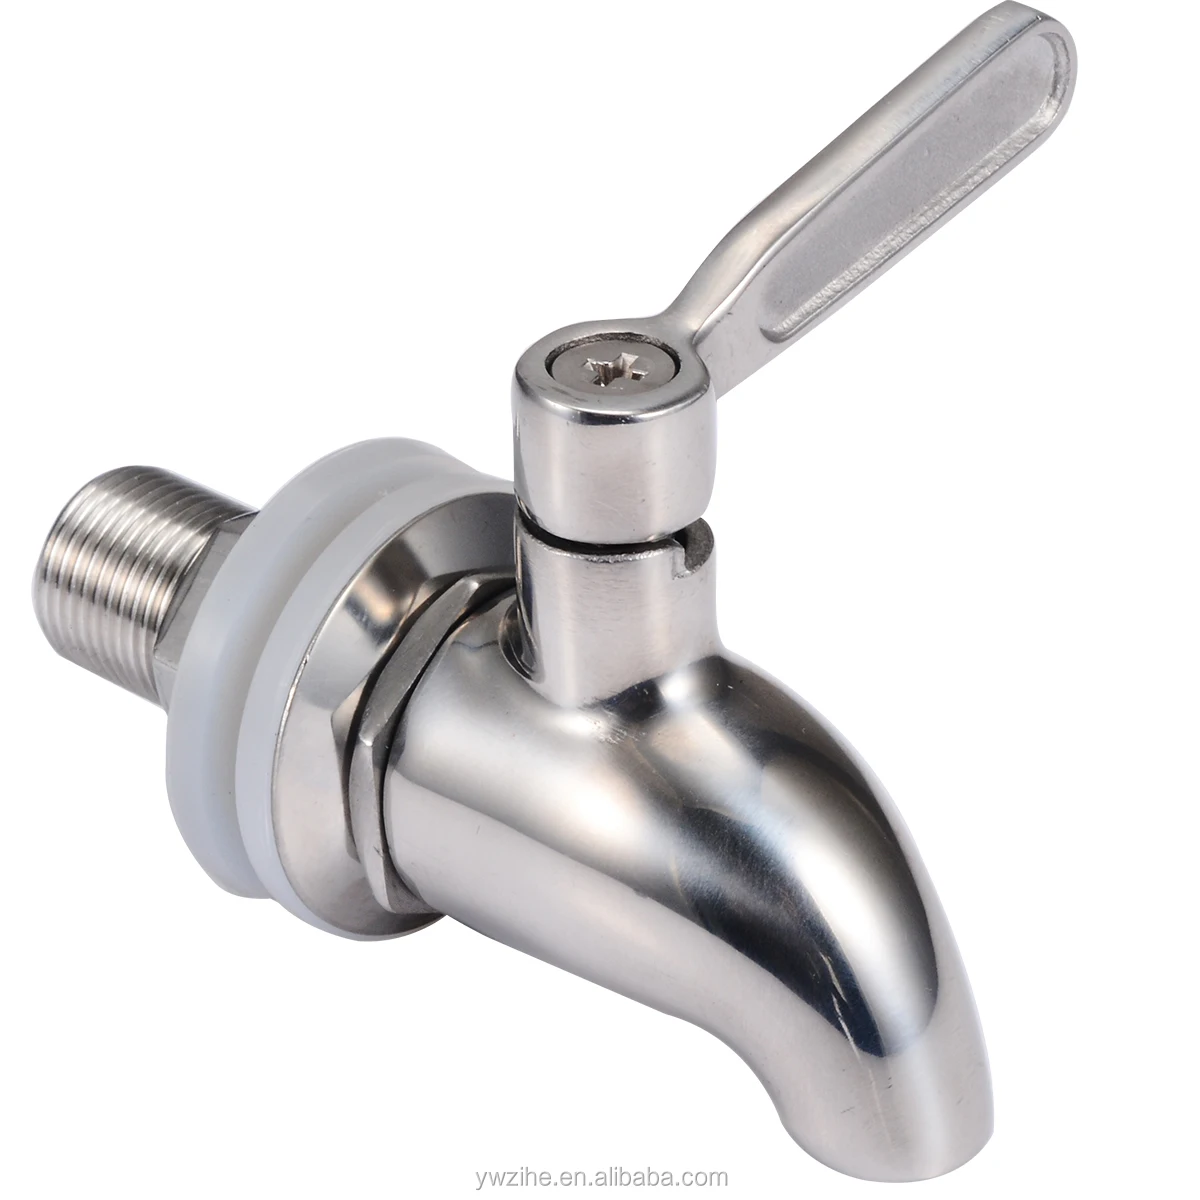 Stainless Steel Faucet Tap Draft Beer Faucet for Home Brew Fermenter Wine DrY8T3 